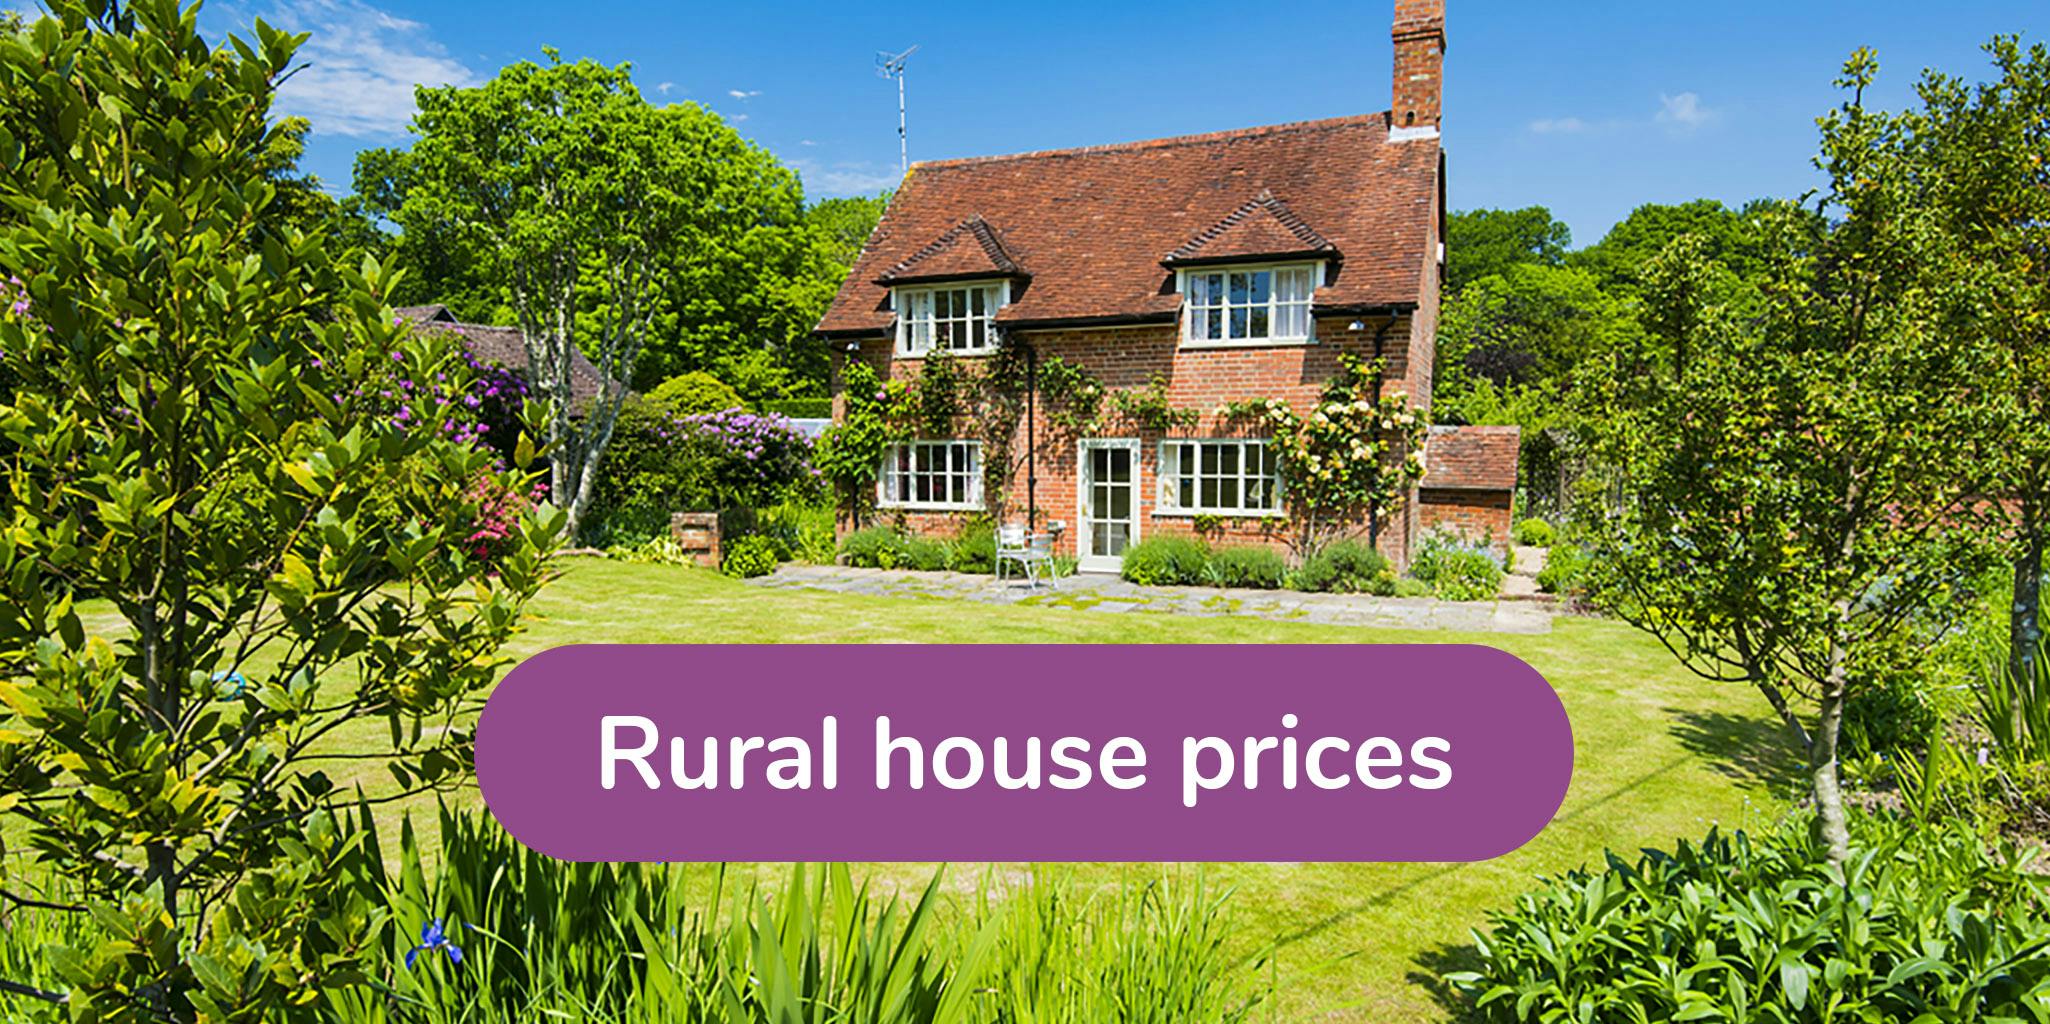 Rural house prices - Image Module